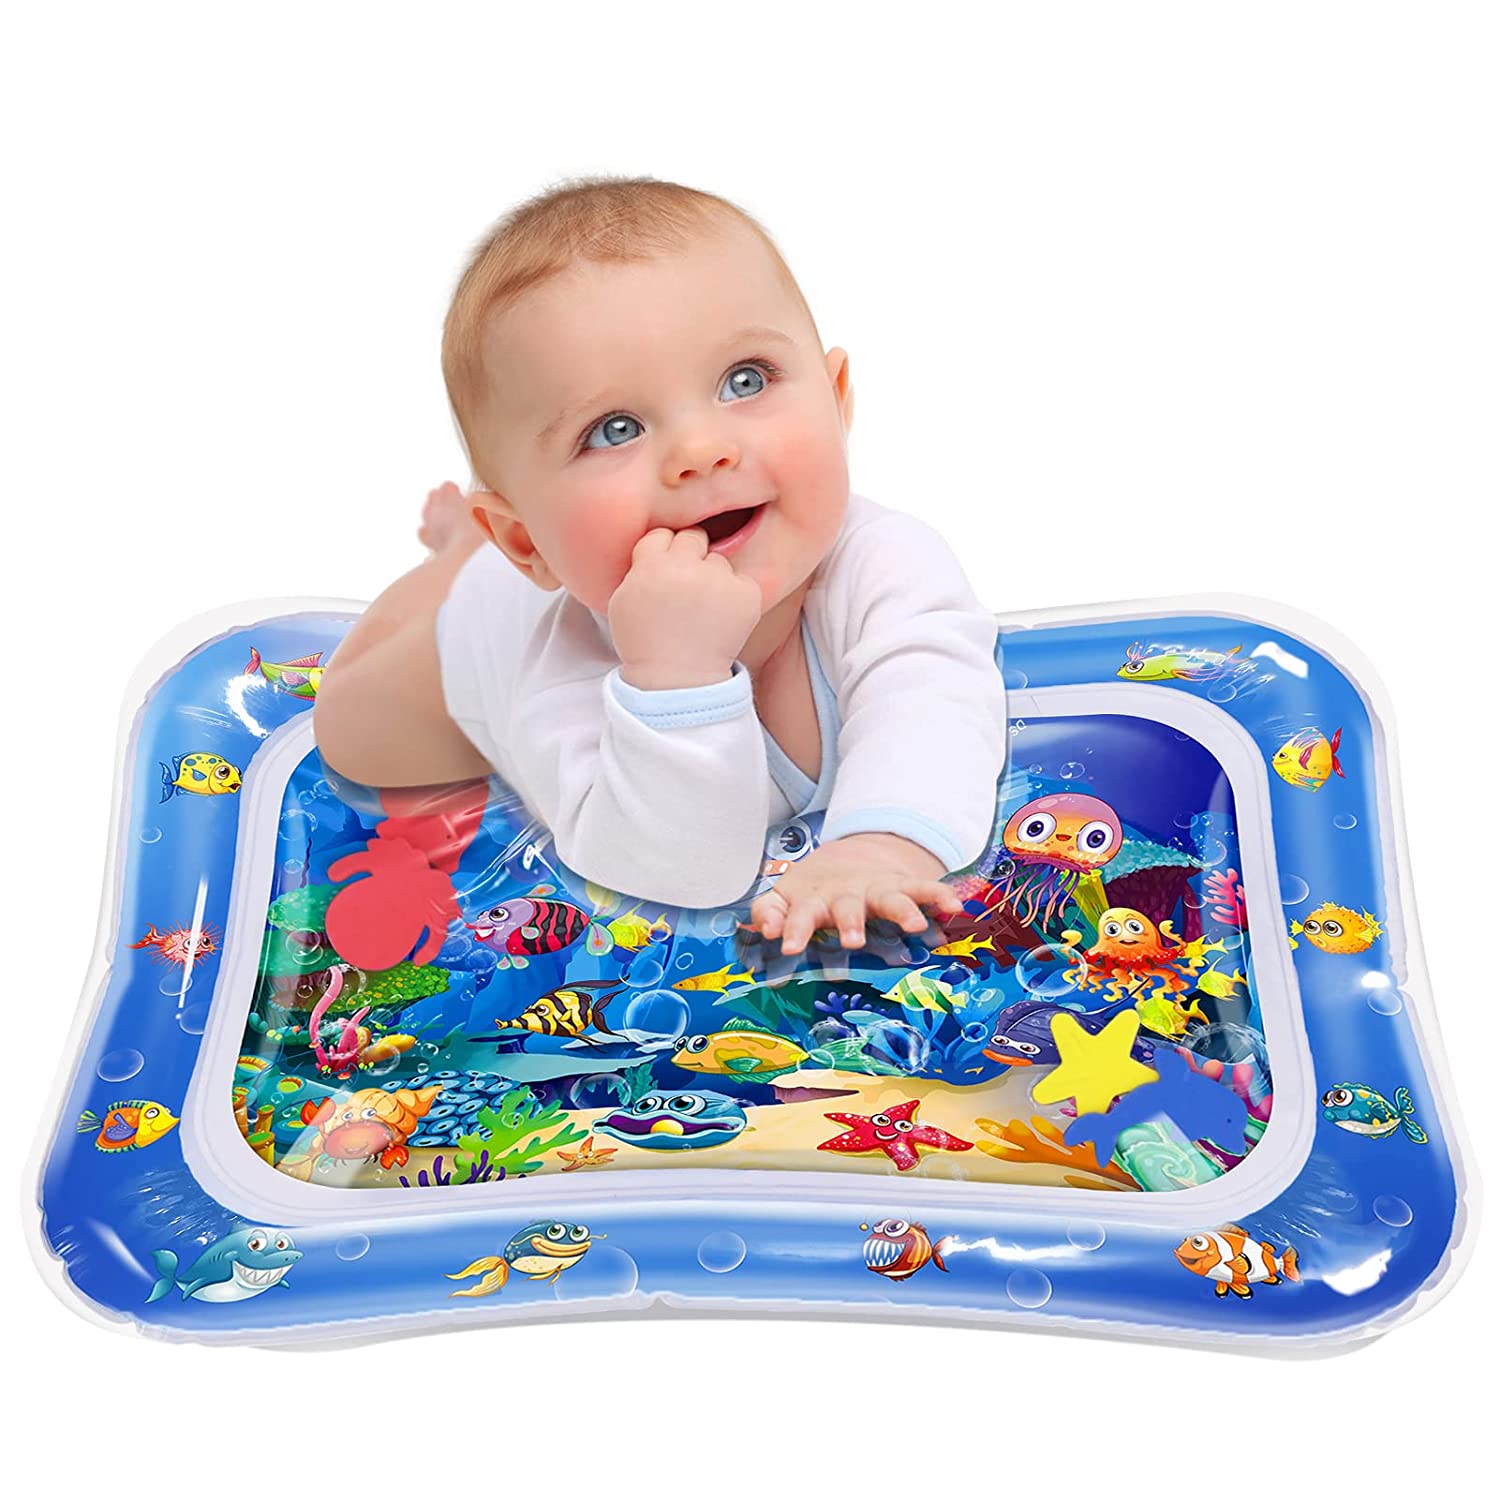 Best Play Mats for Baby Tummy Time